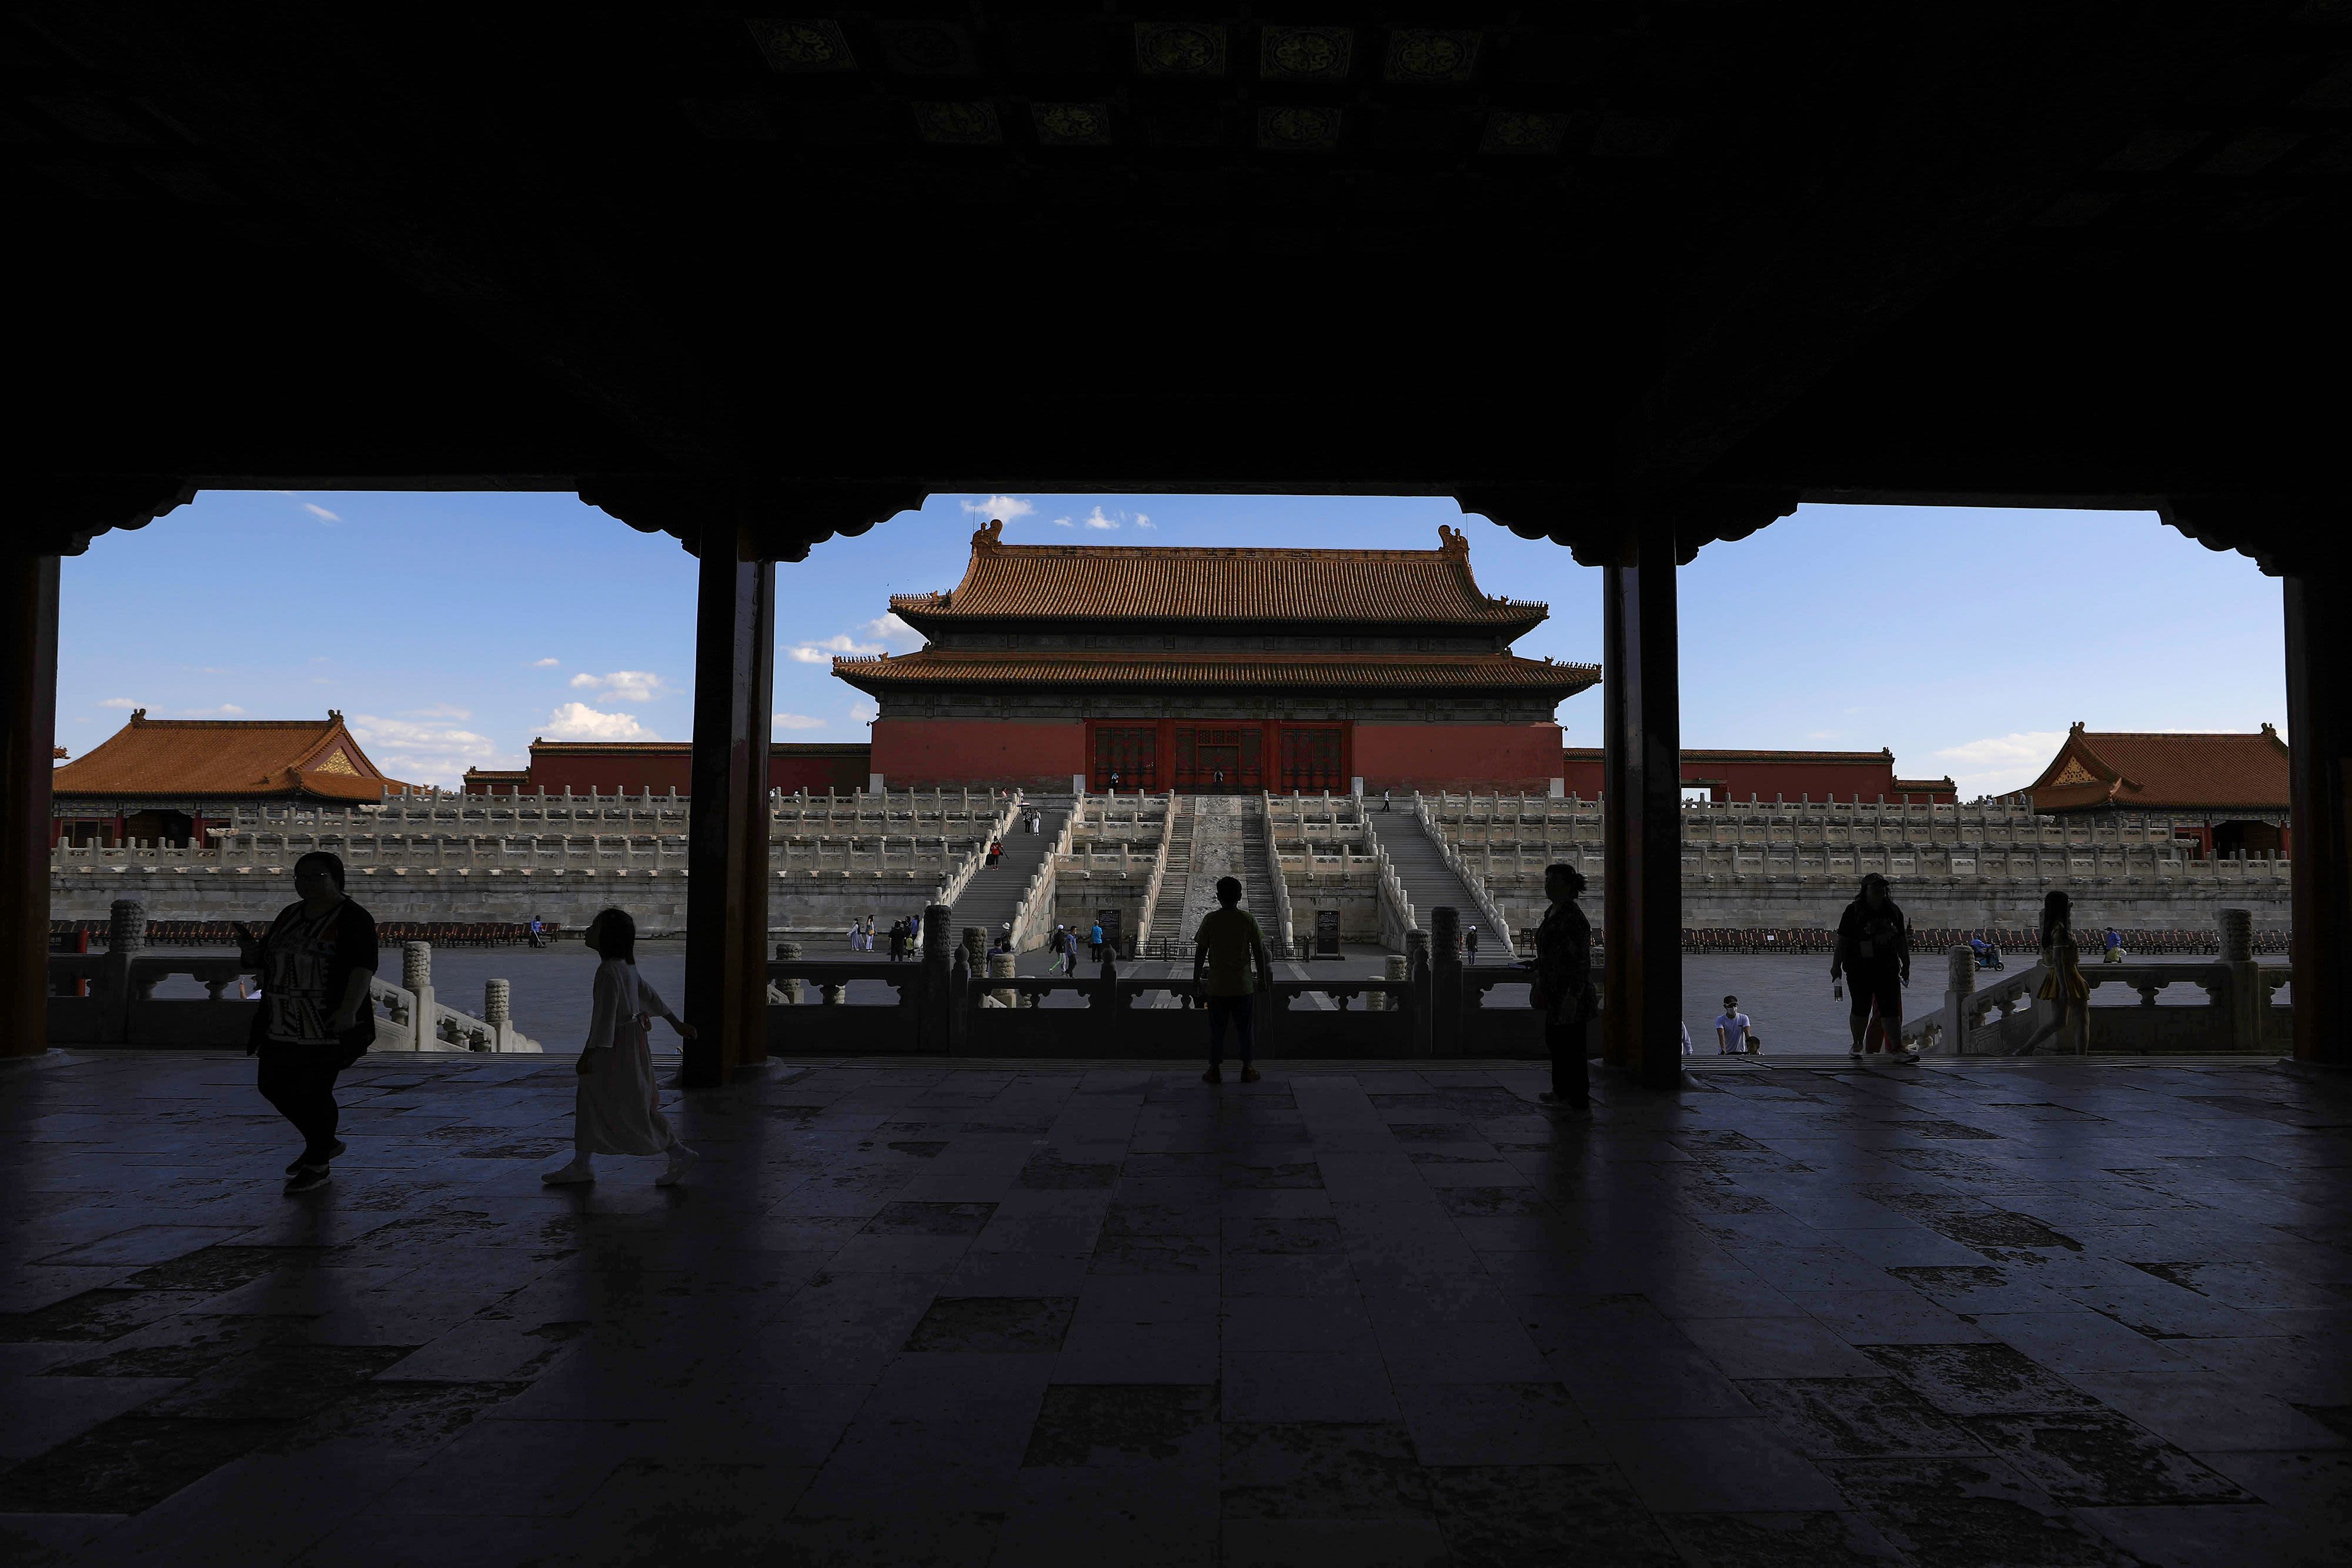 The Forbidden City (article), China